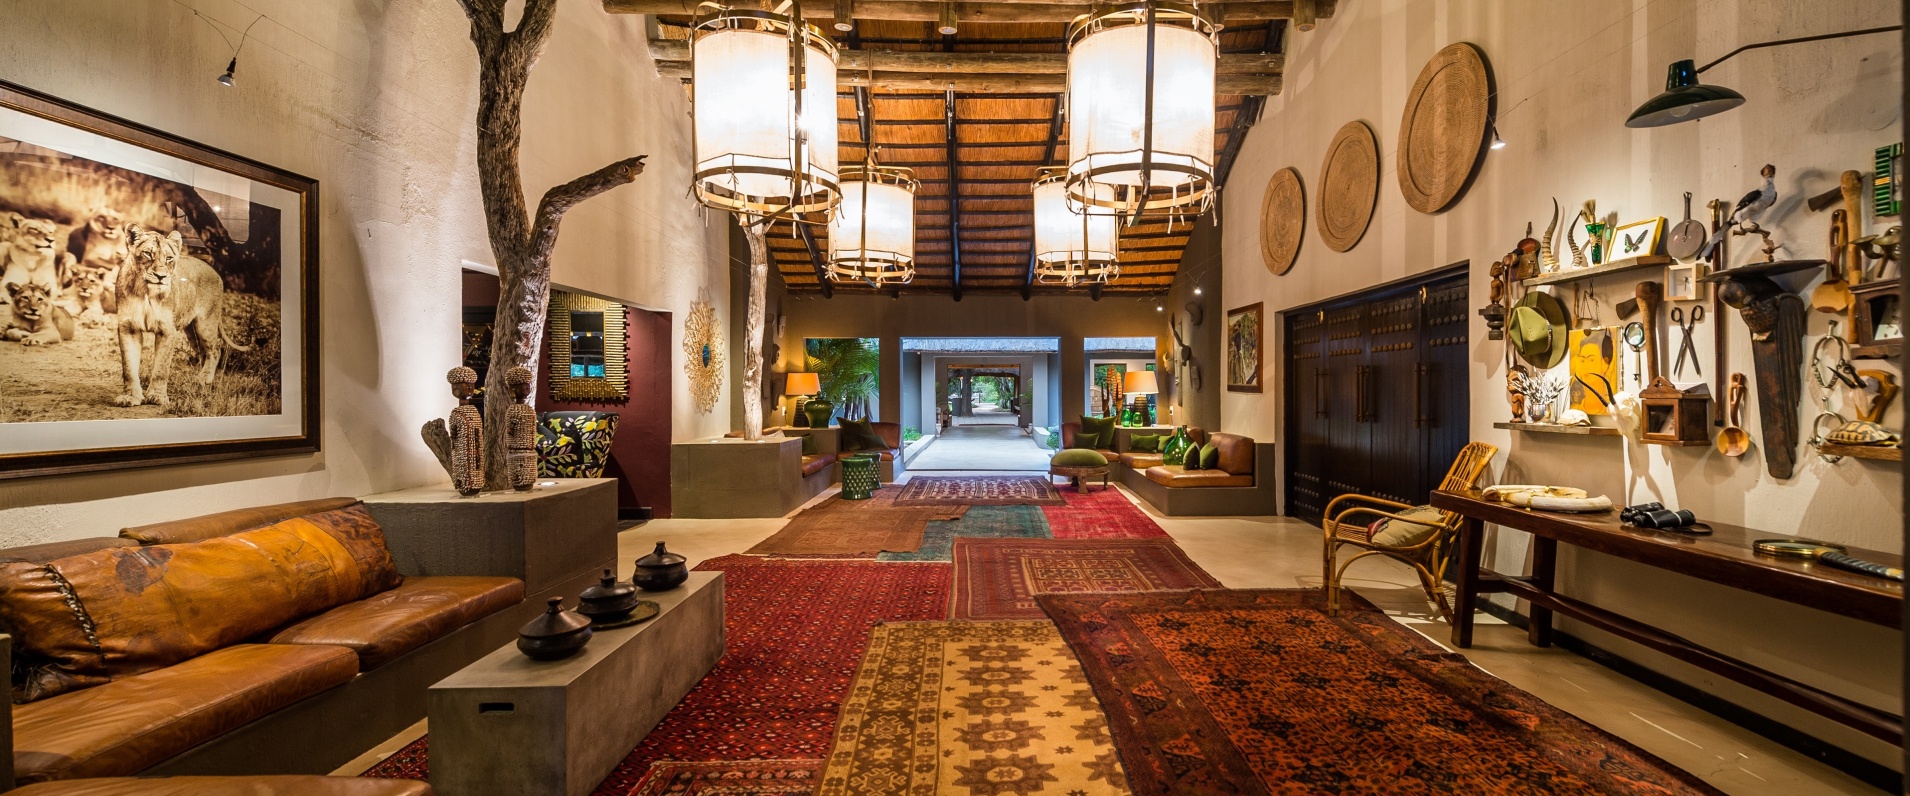 Enter the graceful foyer of Bush Lodge and revel in its captivating interior design.